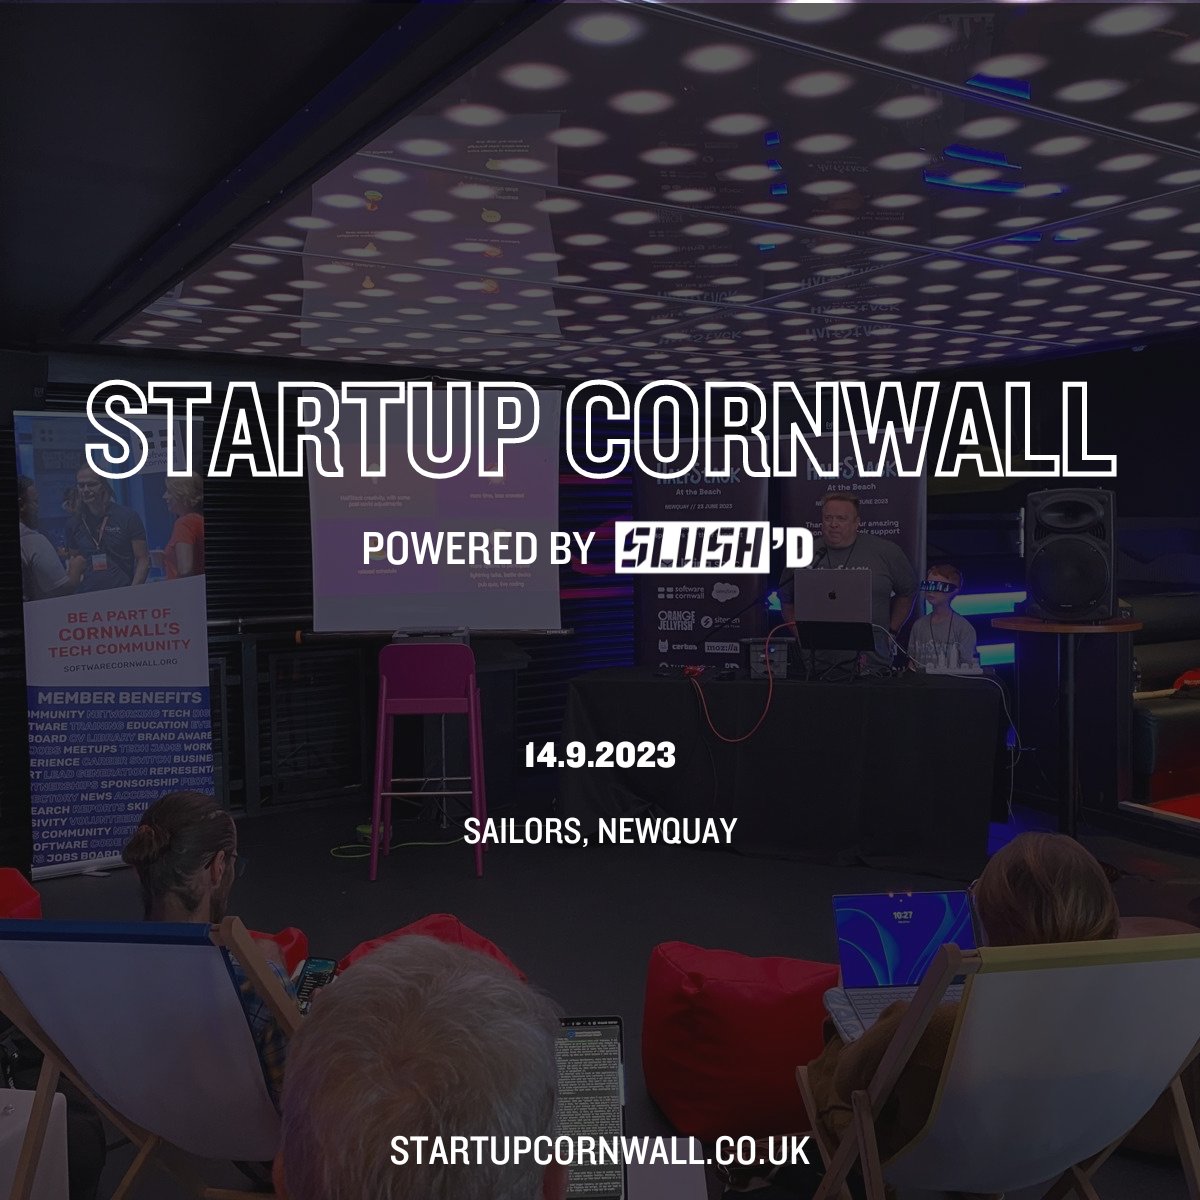 Much like #Slush itself, Startup Cornwall's objectives are to empower local Startups with the tools they need to succeed. The event will be focused on founders and supporting them to be the best they can be. startupcornwall.co.uk #StartupCornwall #Slushd #Founders